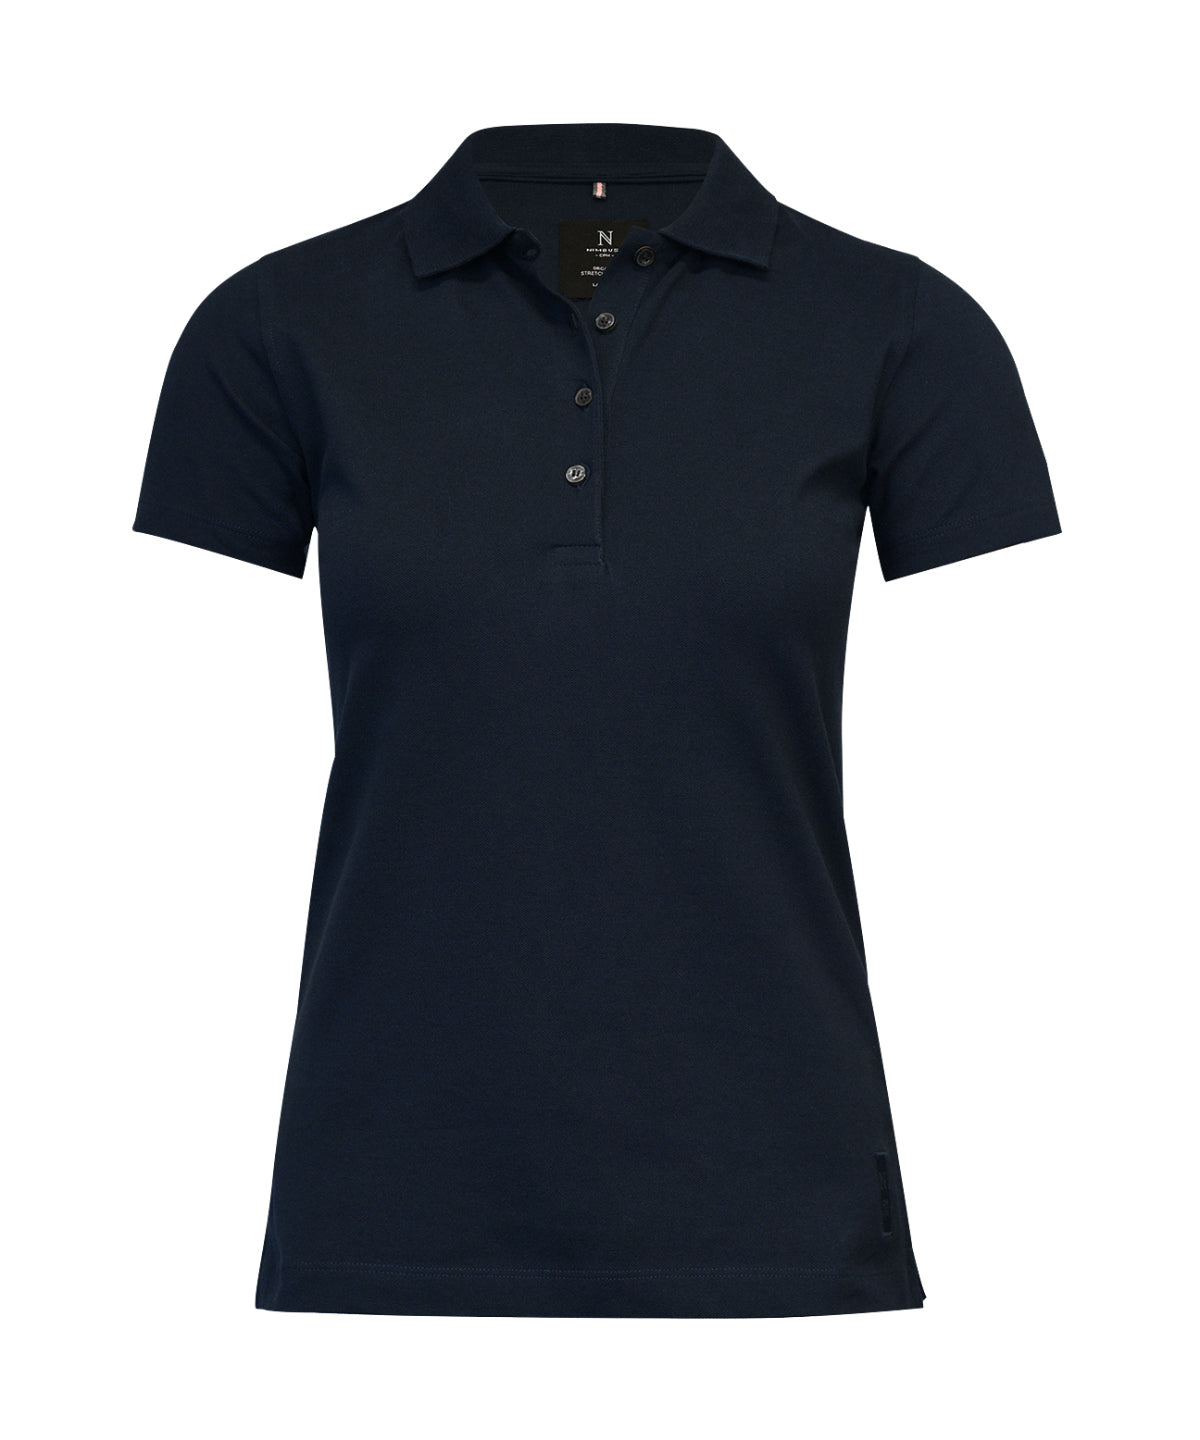 Women’s Harvard classic – stretch deluxe polo